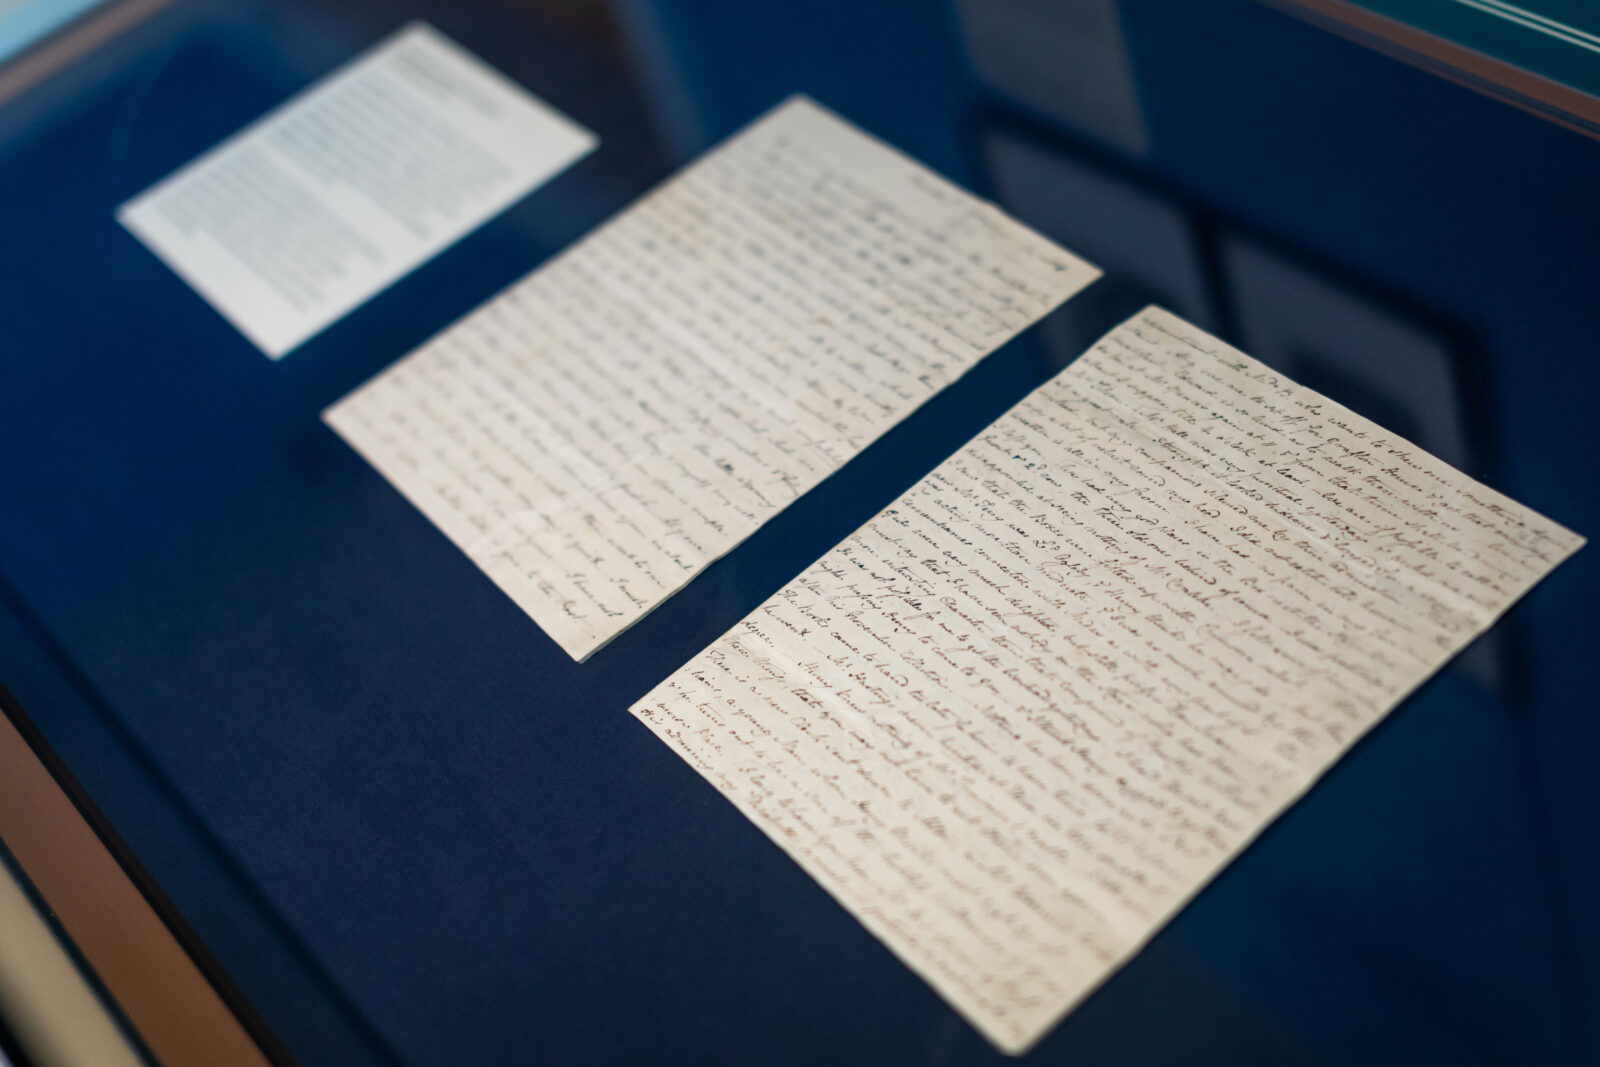 A close up of a two page letter written by Jane Austen, against a blue background in a display case